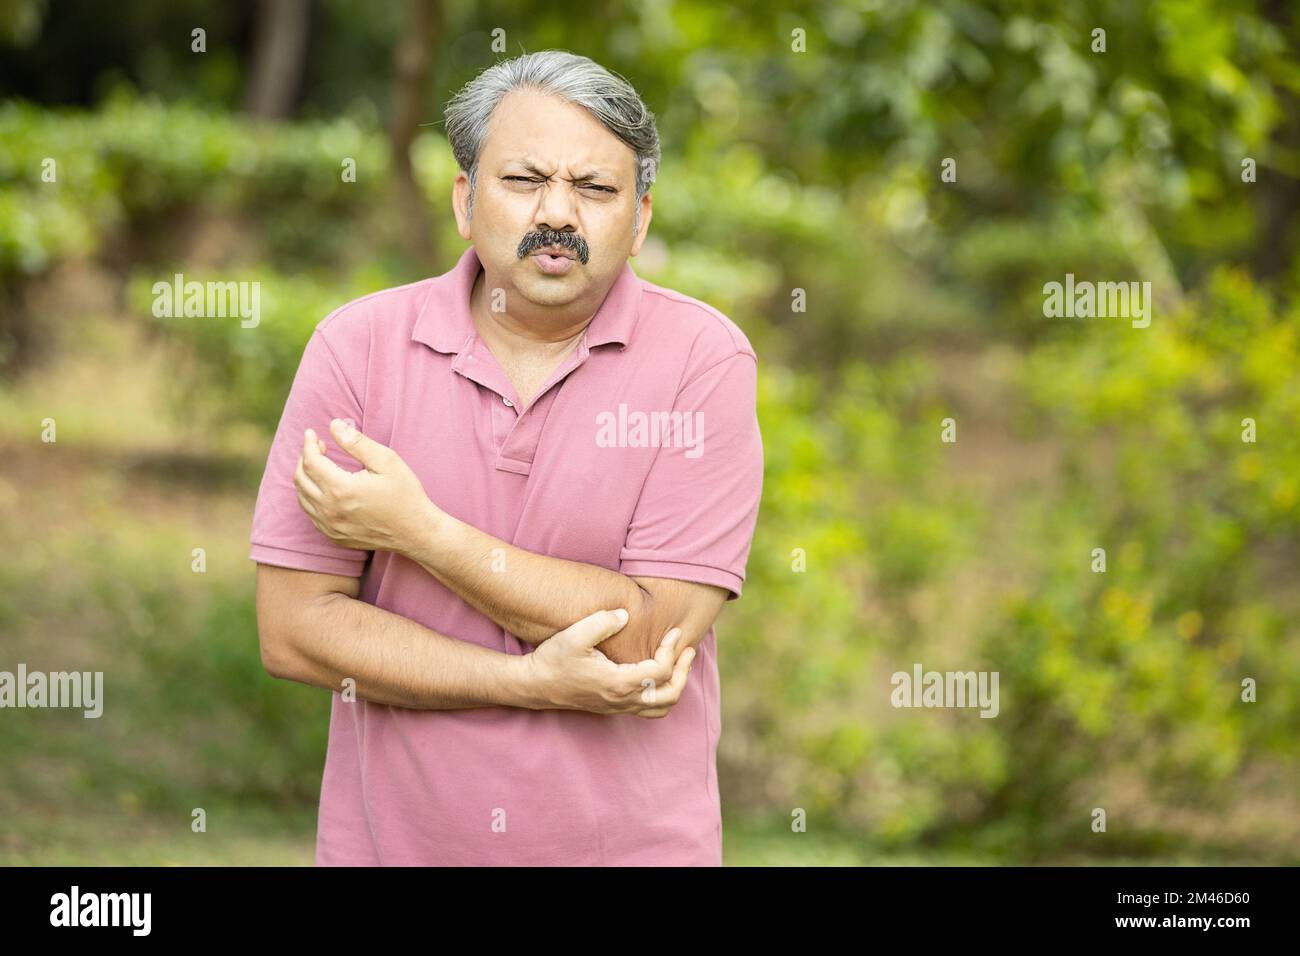 Indian senior man with arm pain standing outdoor at park. Asian Old man hand holding his elbow suffering from elbow pain. Health care. Stock Photo